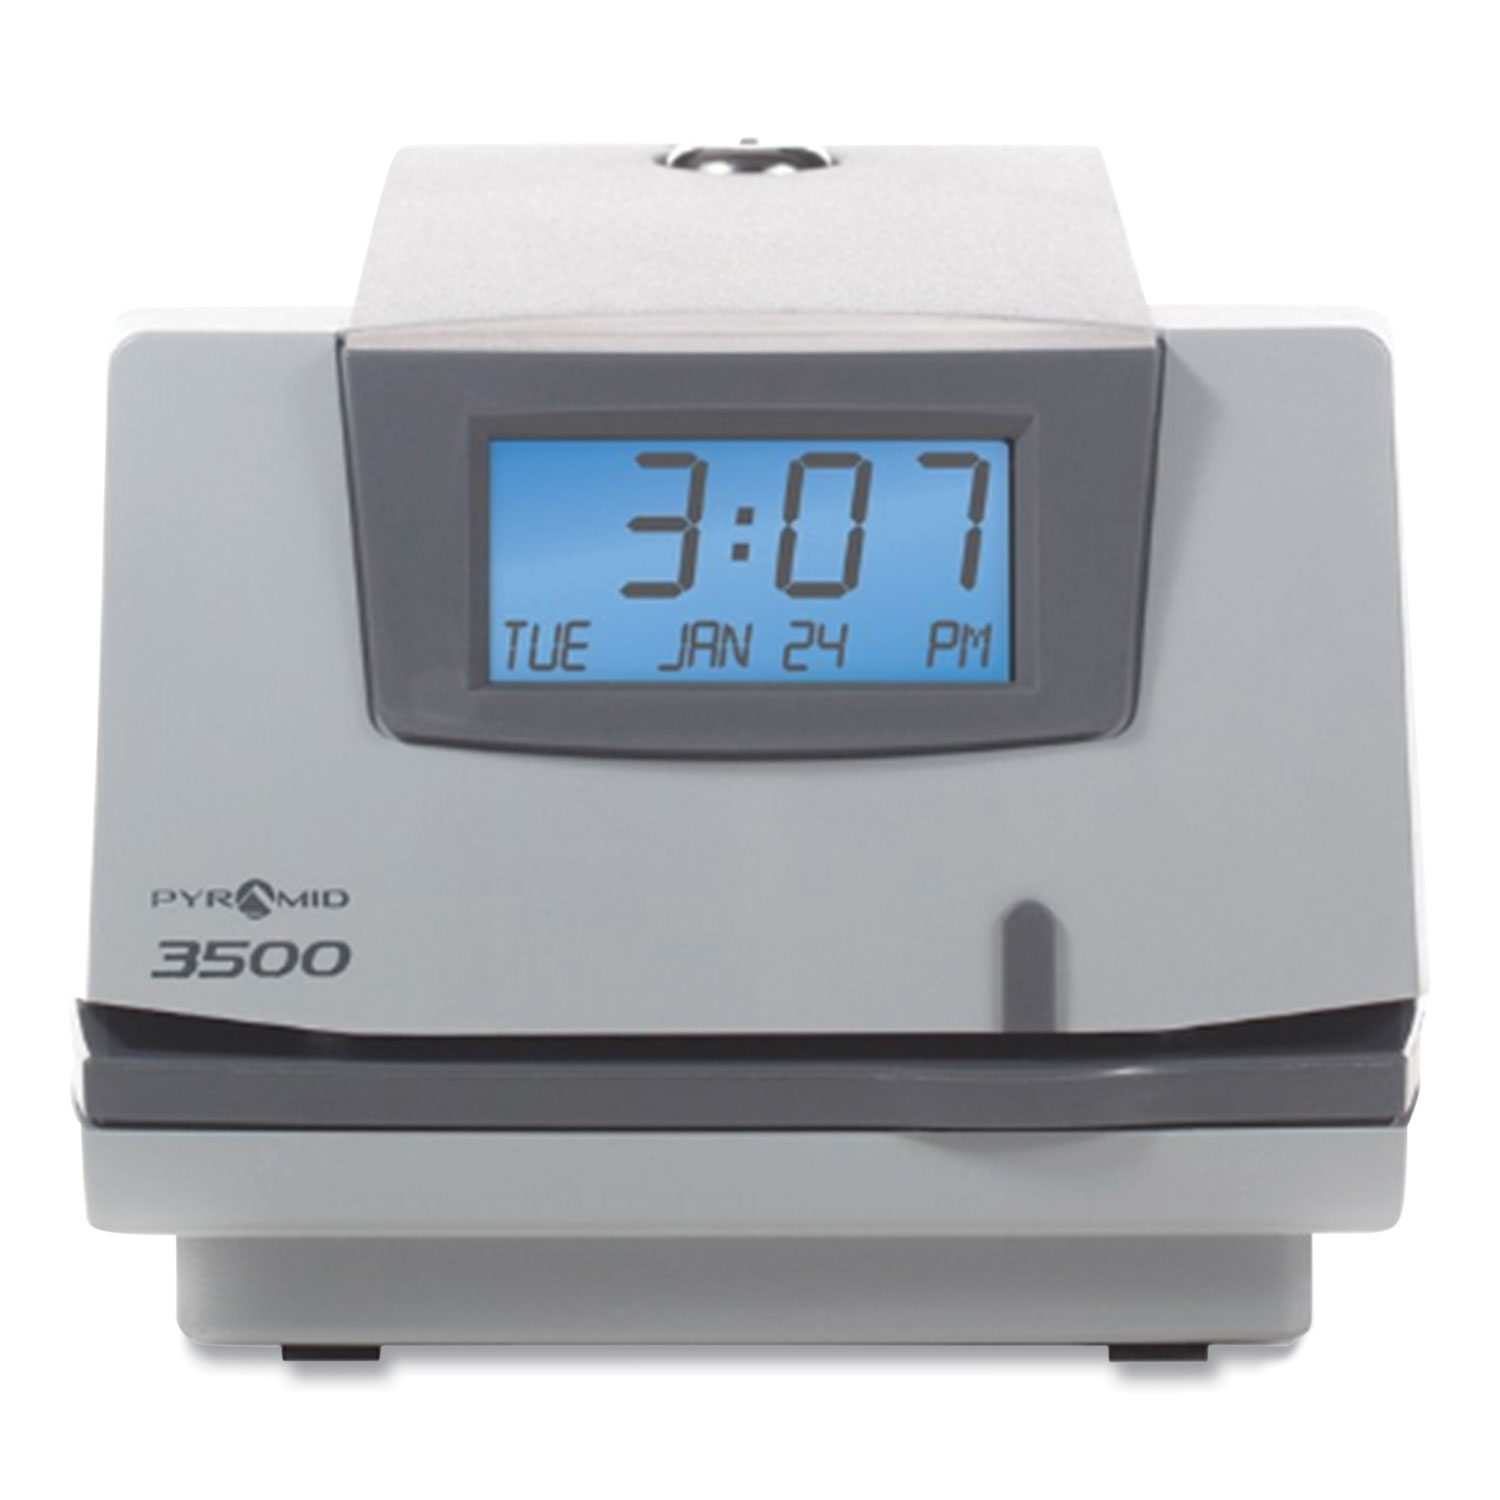  Pyramid Technologies 3500 3500 Time Clock and Document Stamp, Light Gray/Charcoal (PTI430286) 